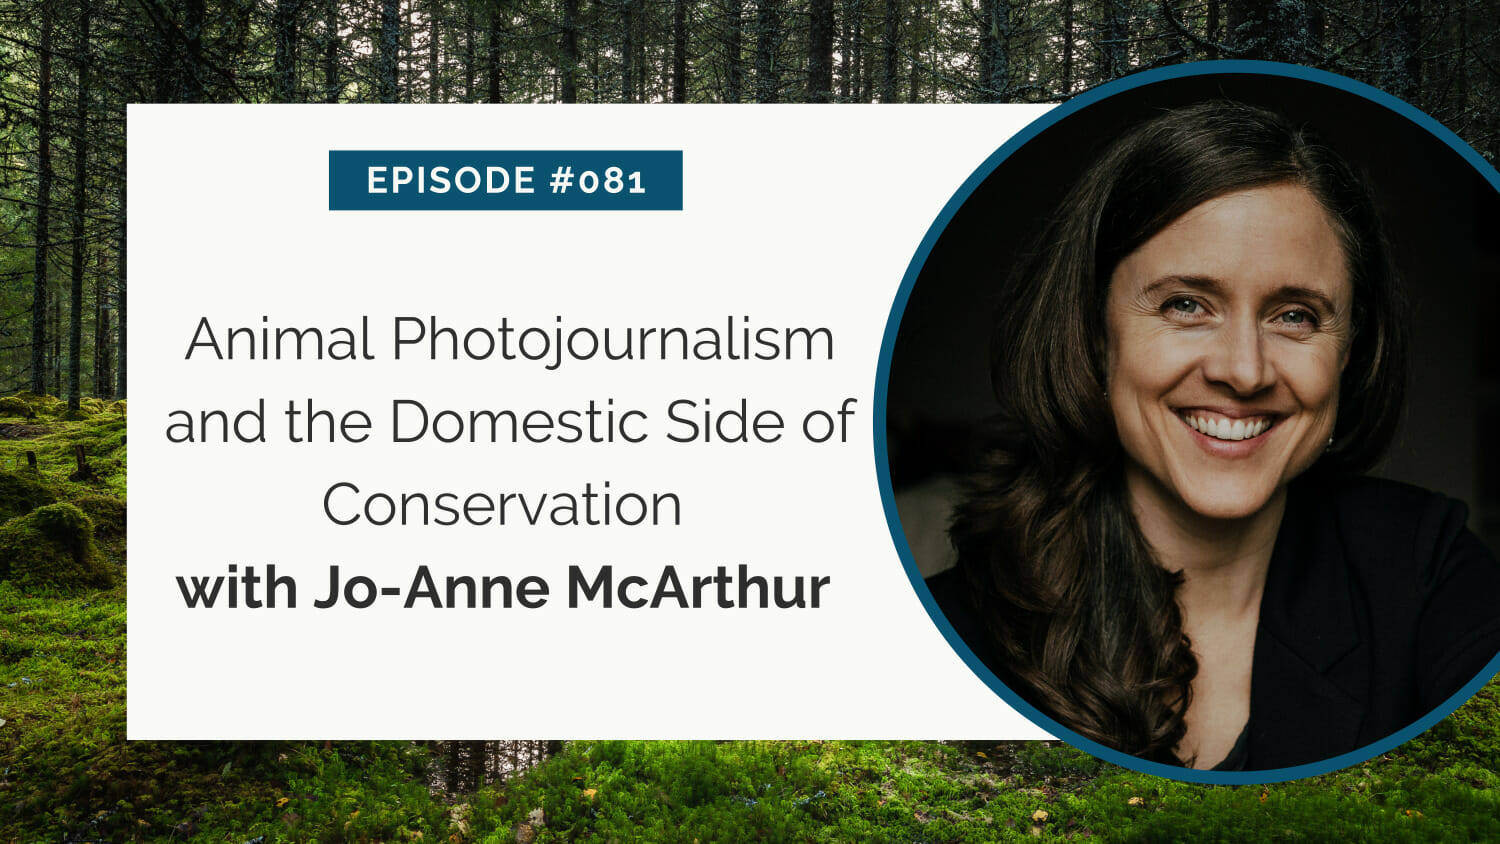 Podcast episode graphic featuring jo-anne mcarthur discussing animal photojournalism and domestic conservation on episode #081.